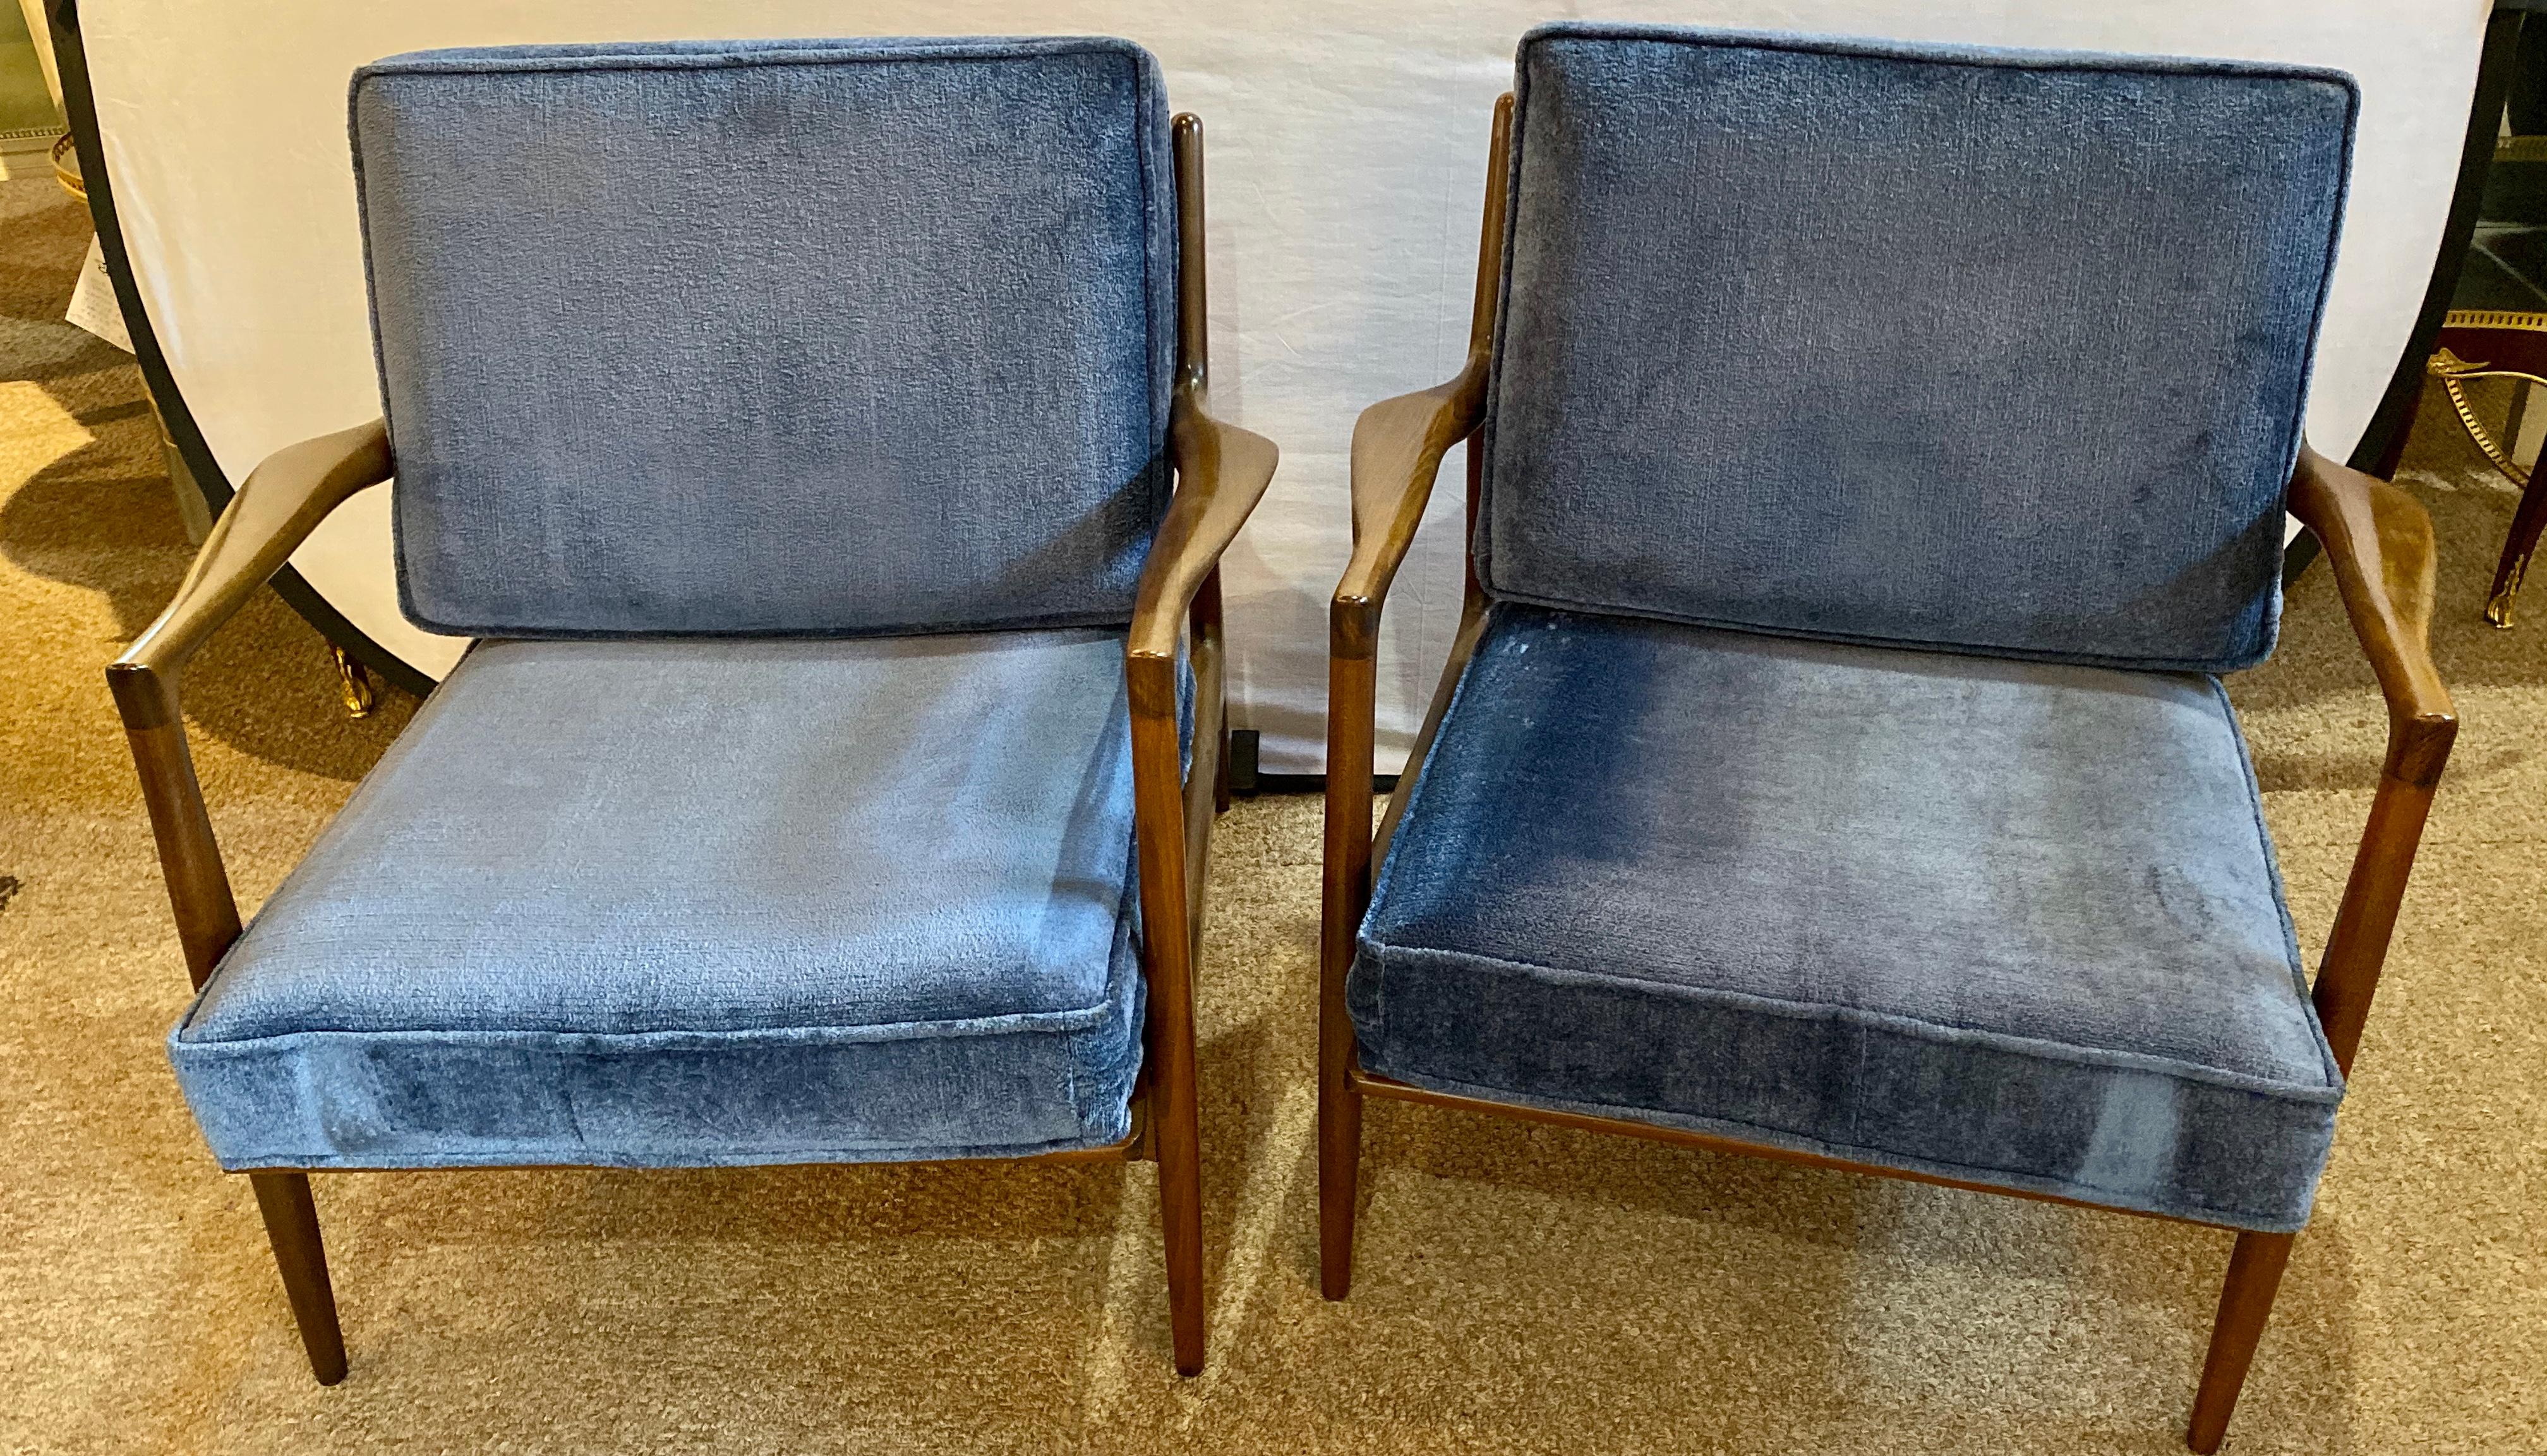 Mid-Century Modern Ib Kofod Larson Selig arm lounge chairs. A pair with Danish control label on each. The pair having overstuffed blue cushions on sleek slender and fine conditioned frames.
1SSX